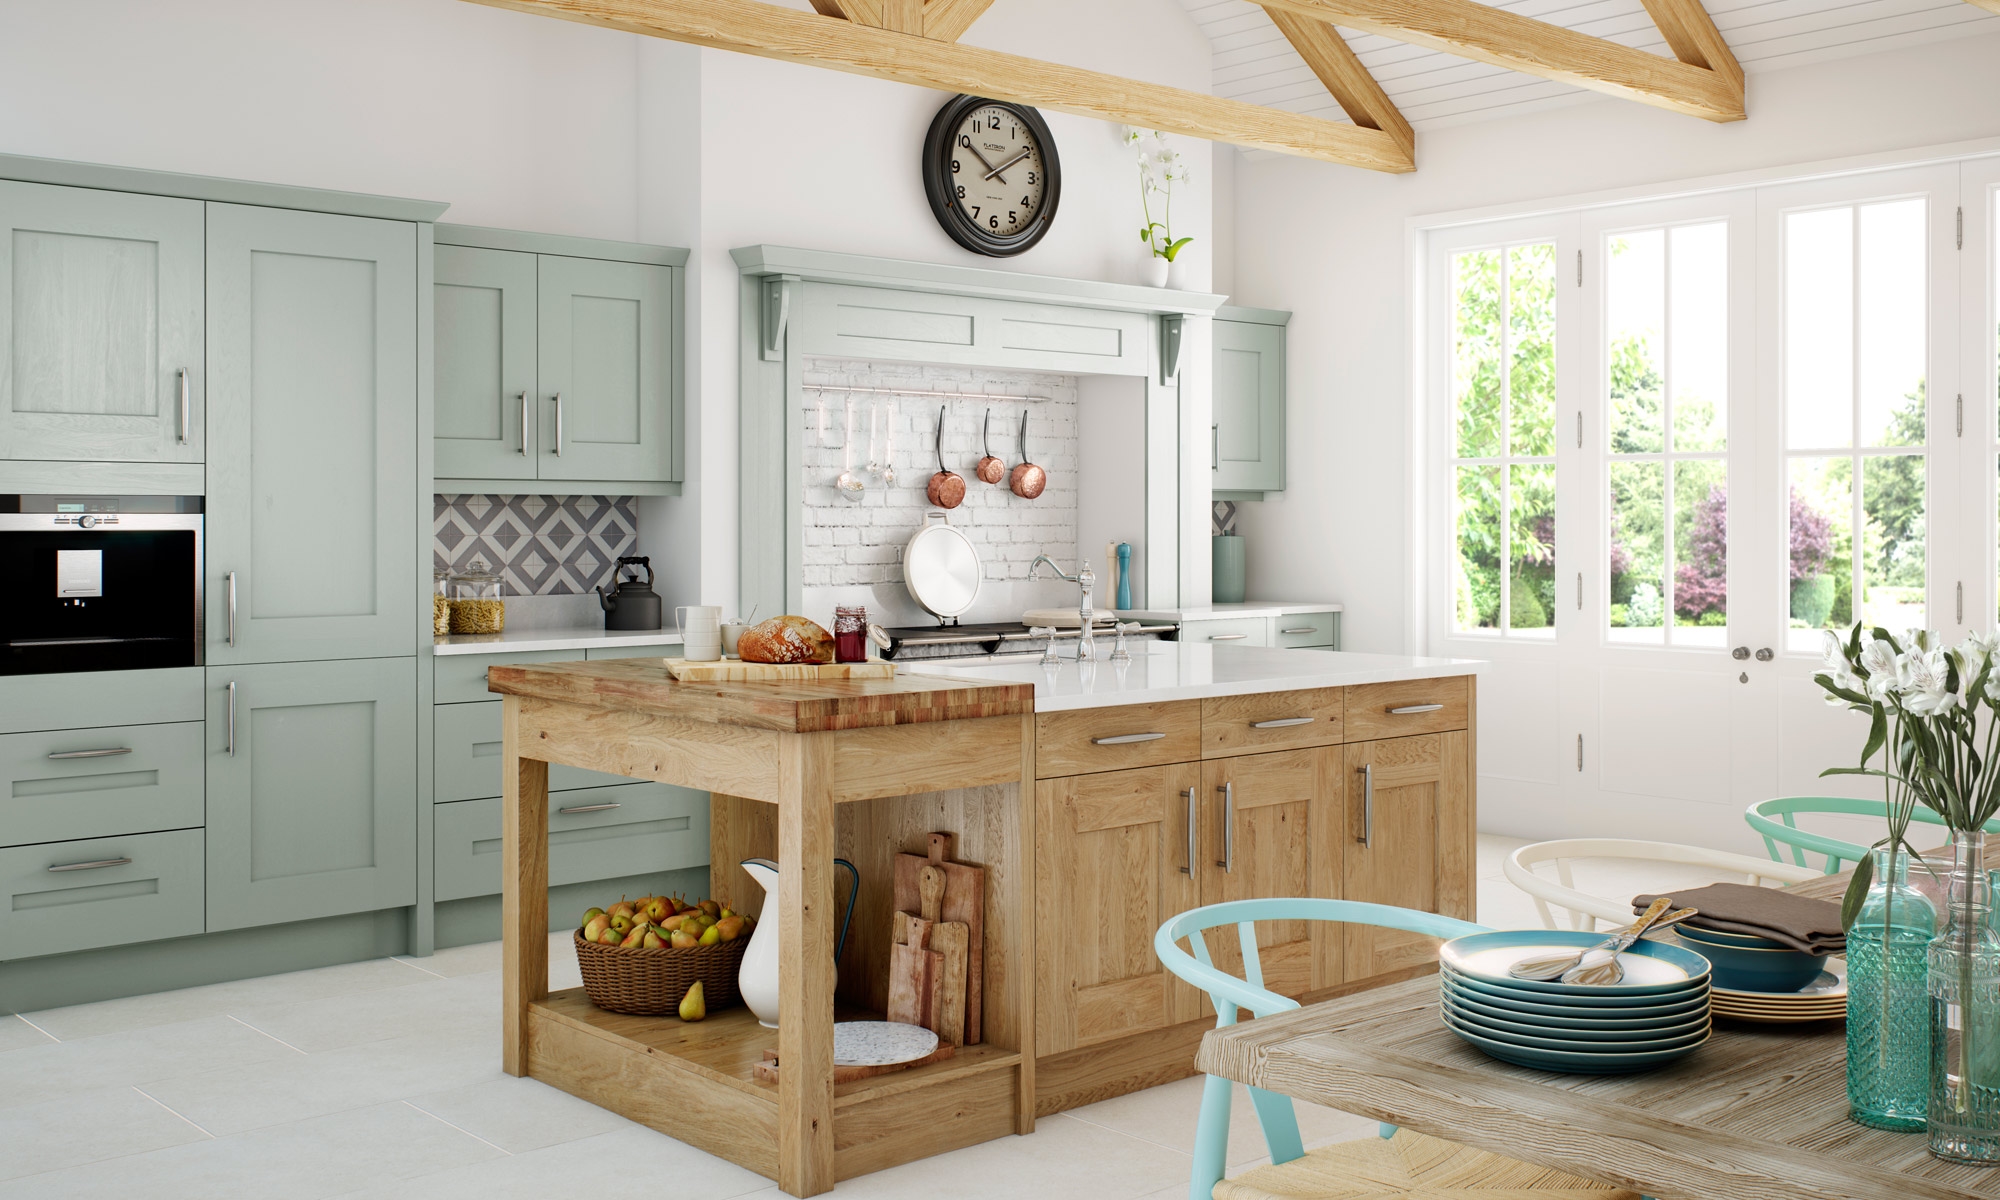 The Kitchen Centre Manufacturers Of All Types Of Domestic And Commercial Furniture